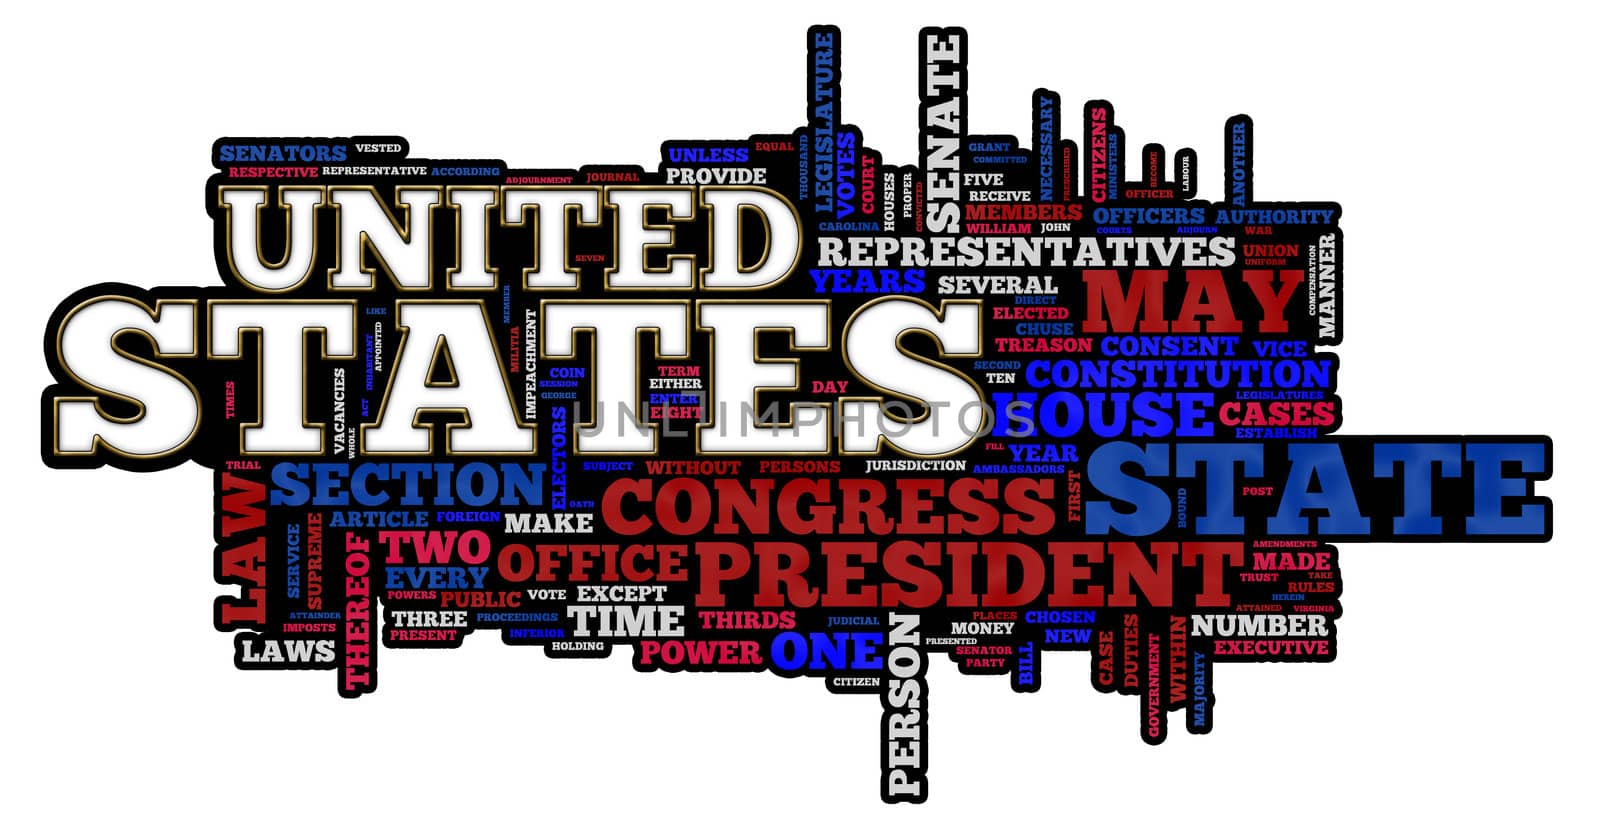 United States of America by mary981